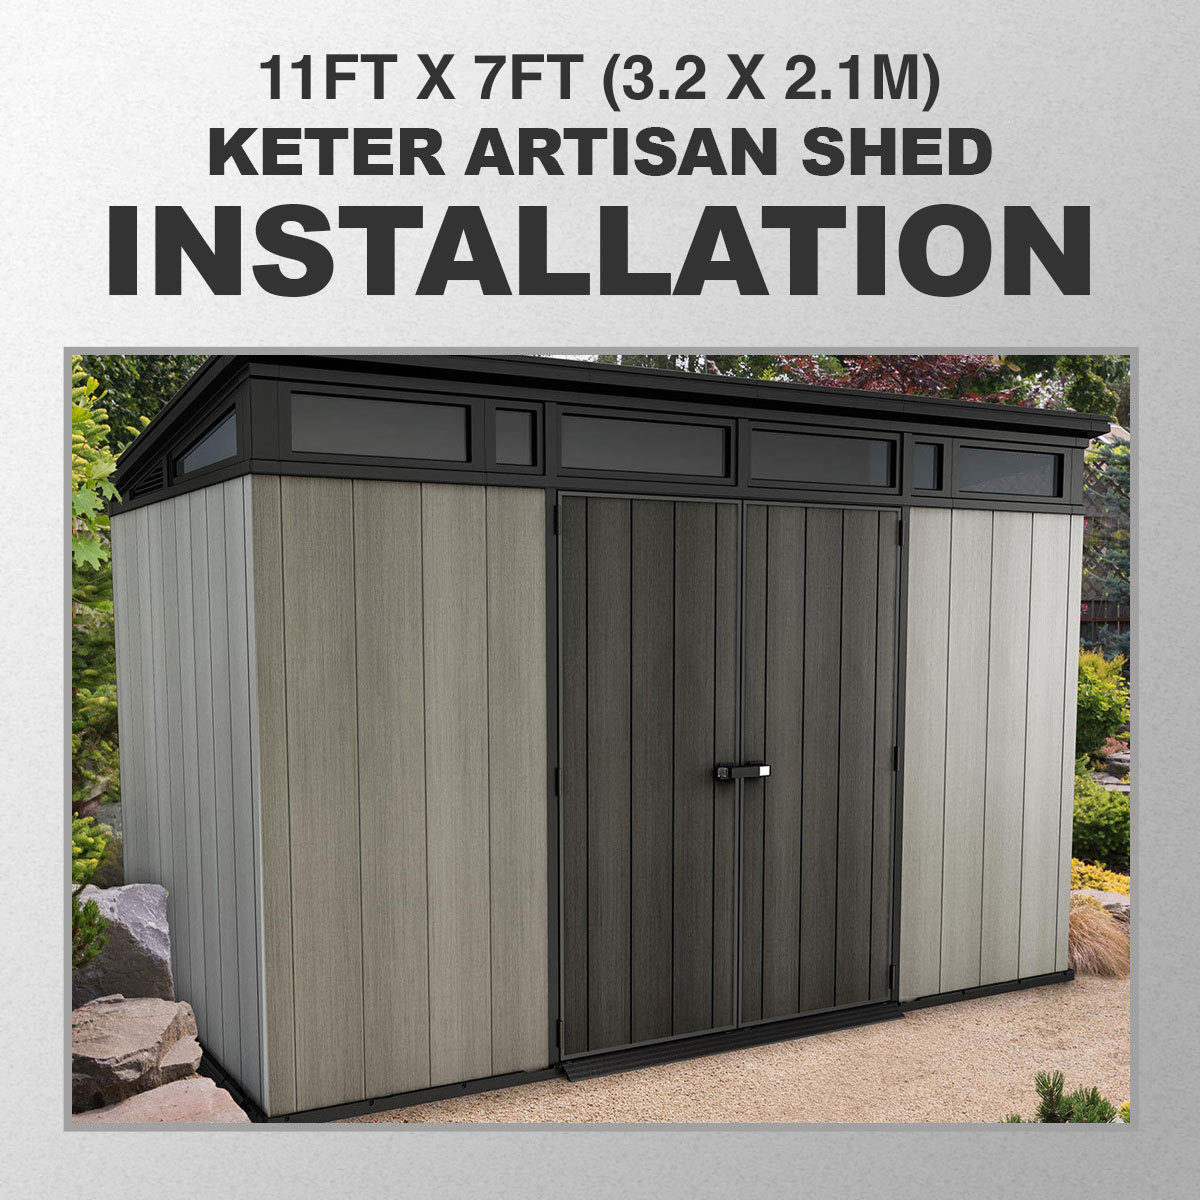 Installation for Keter Artisan 11ft x 7ft (3.2 x 2.1m) Shed